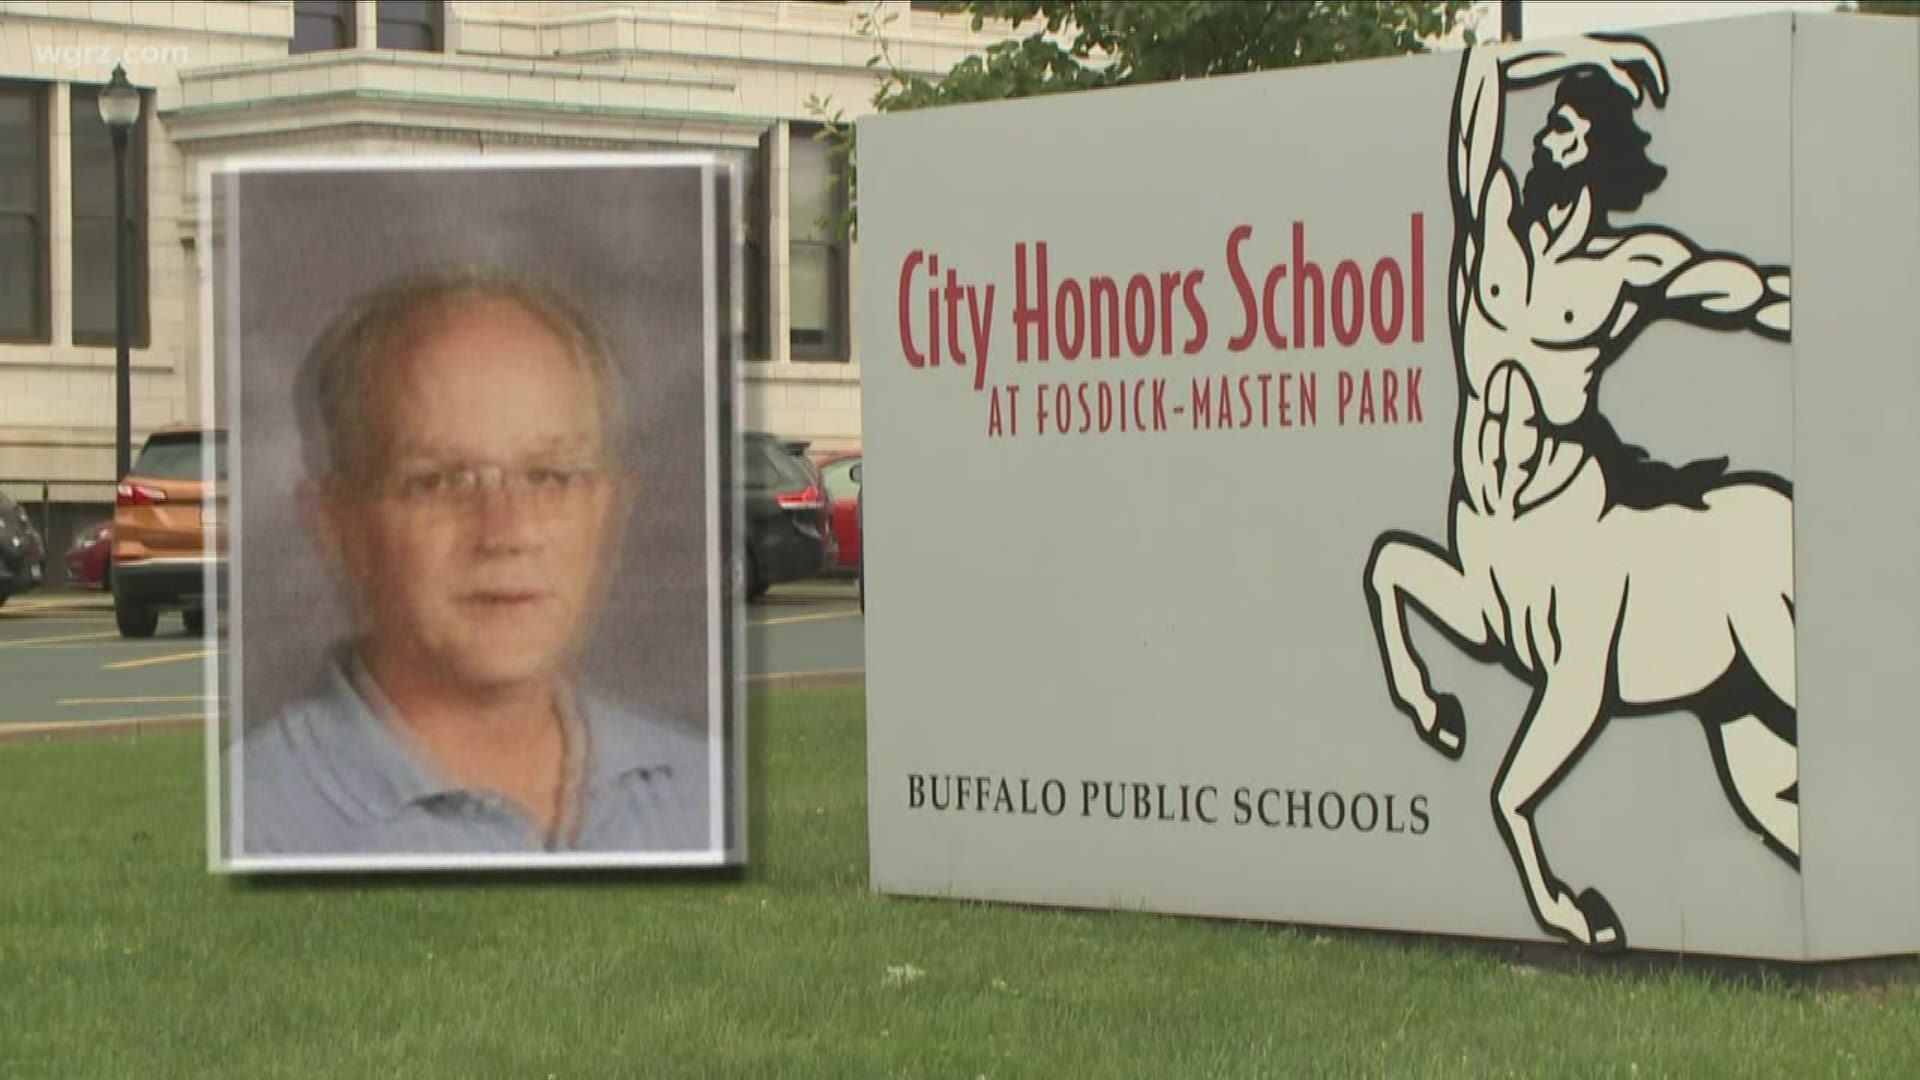 Former City Honors teacher indicted on child porn charges | wgrz.com